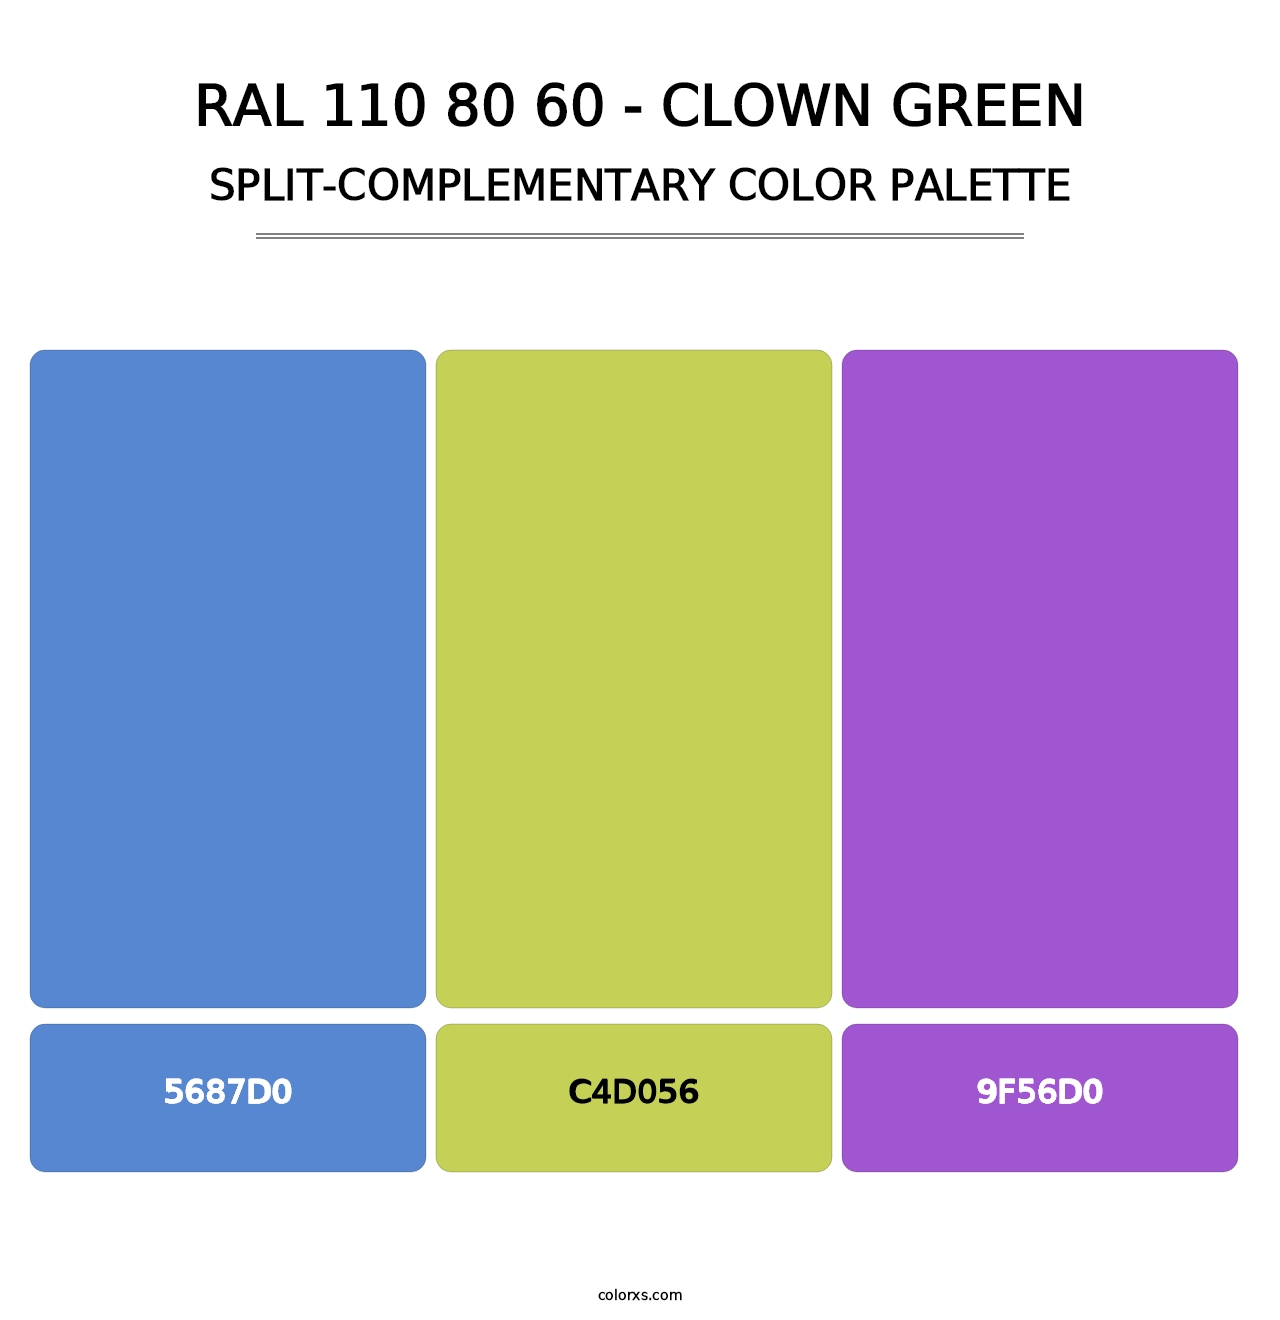 RAL 110 80 60 - Clown Green - Split-Complementary Color Palette